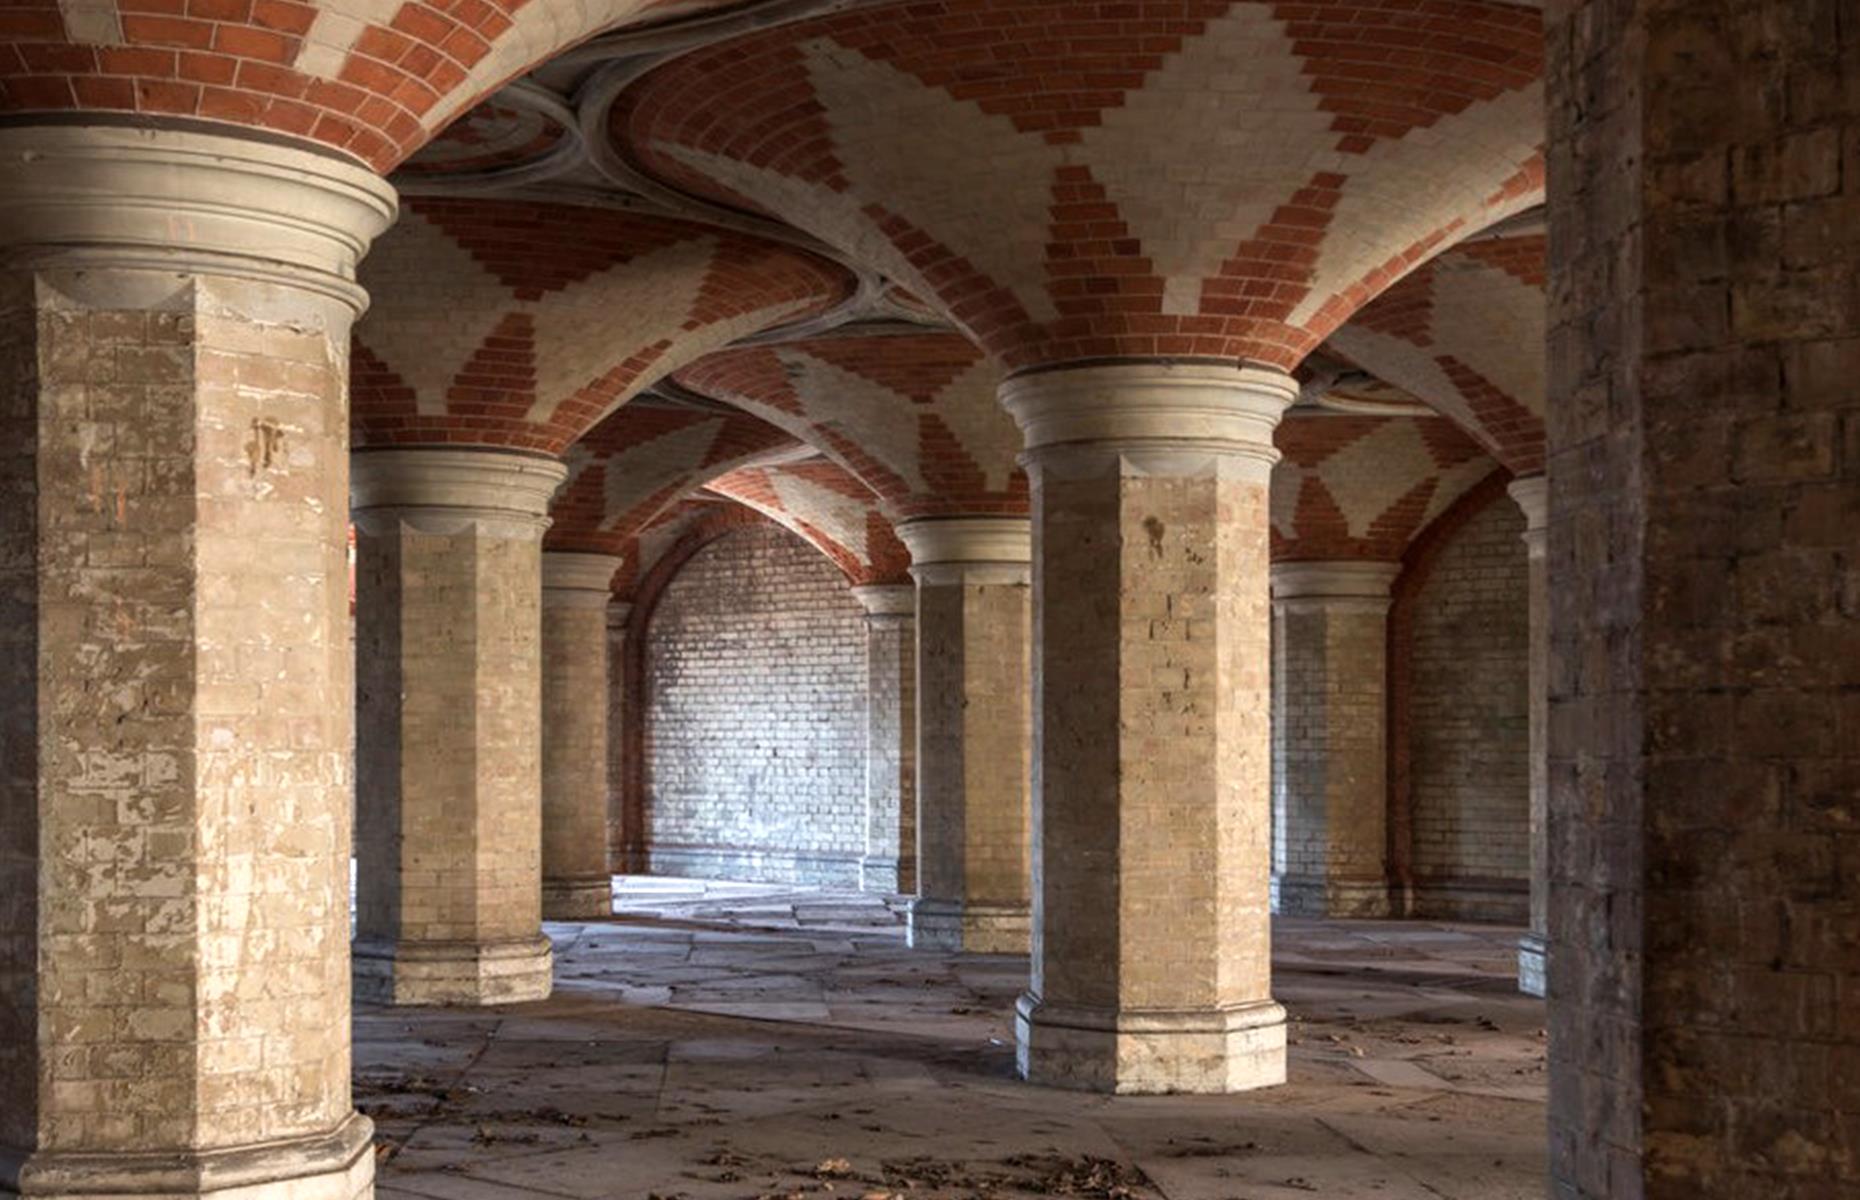 <p>You might not know that this architectural feat lies beneath the streets of south London – but the head-turning subway has existed since the 1850s. It originally served as an access point for Crystal Palace, an elaborate confection that housed the Great Exhibition of 1851, but which was destroyed by fire in the 1930s. Today the subway, with its columns and bold brick patterns, is sporadically open to visitors (though it's <a href="https://cpsubway.org.uk/visiting">currently closed</a> for major restoration work). </p>